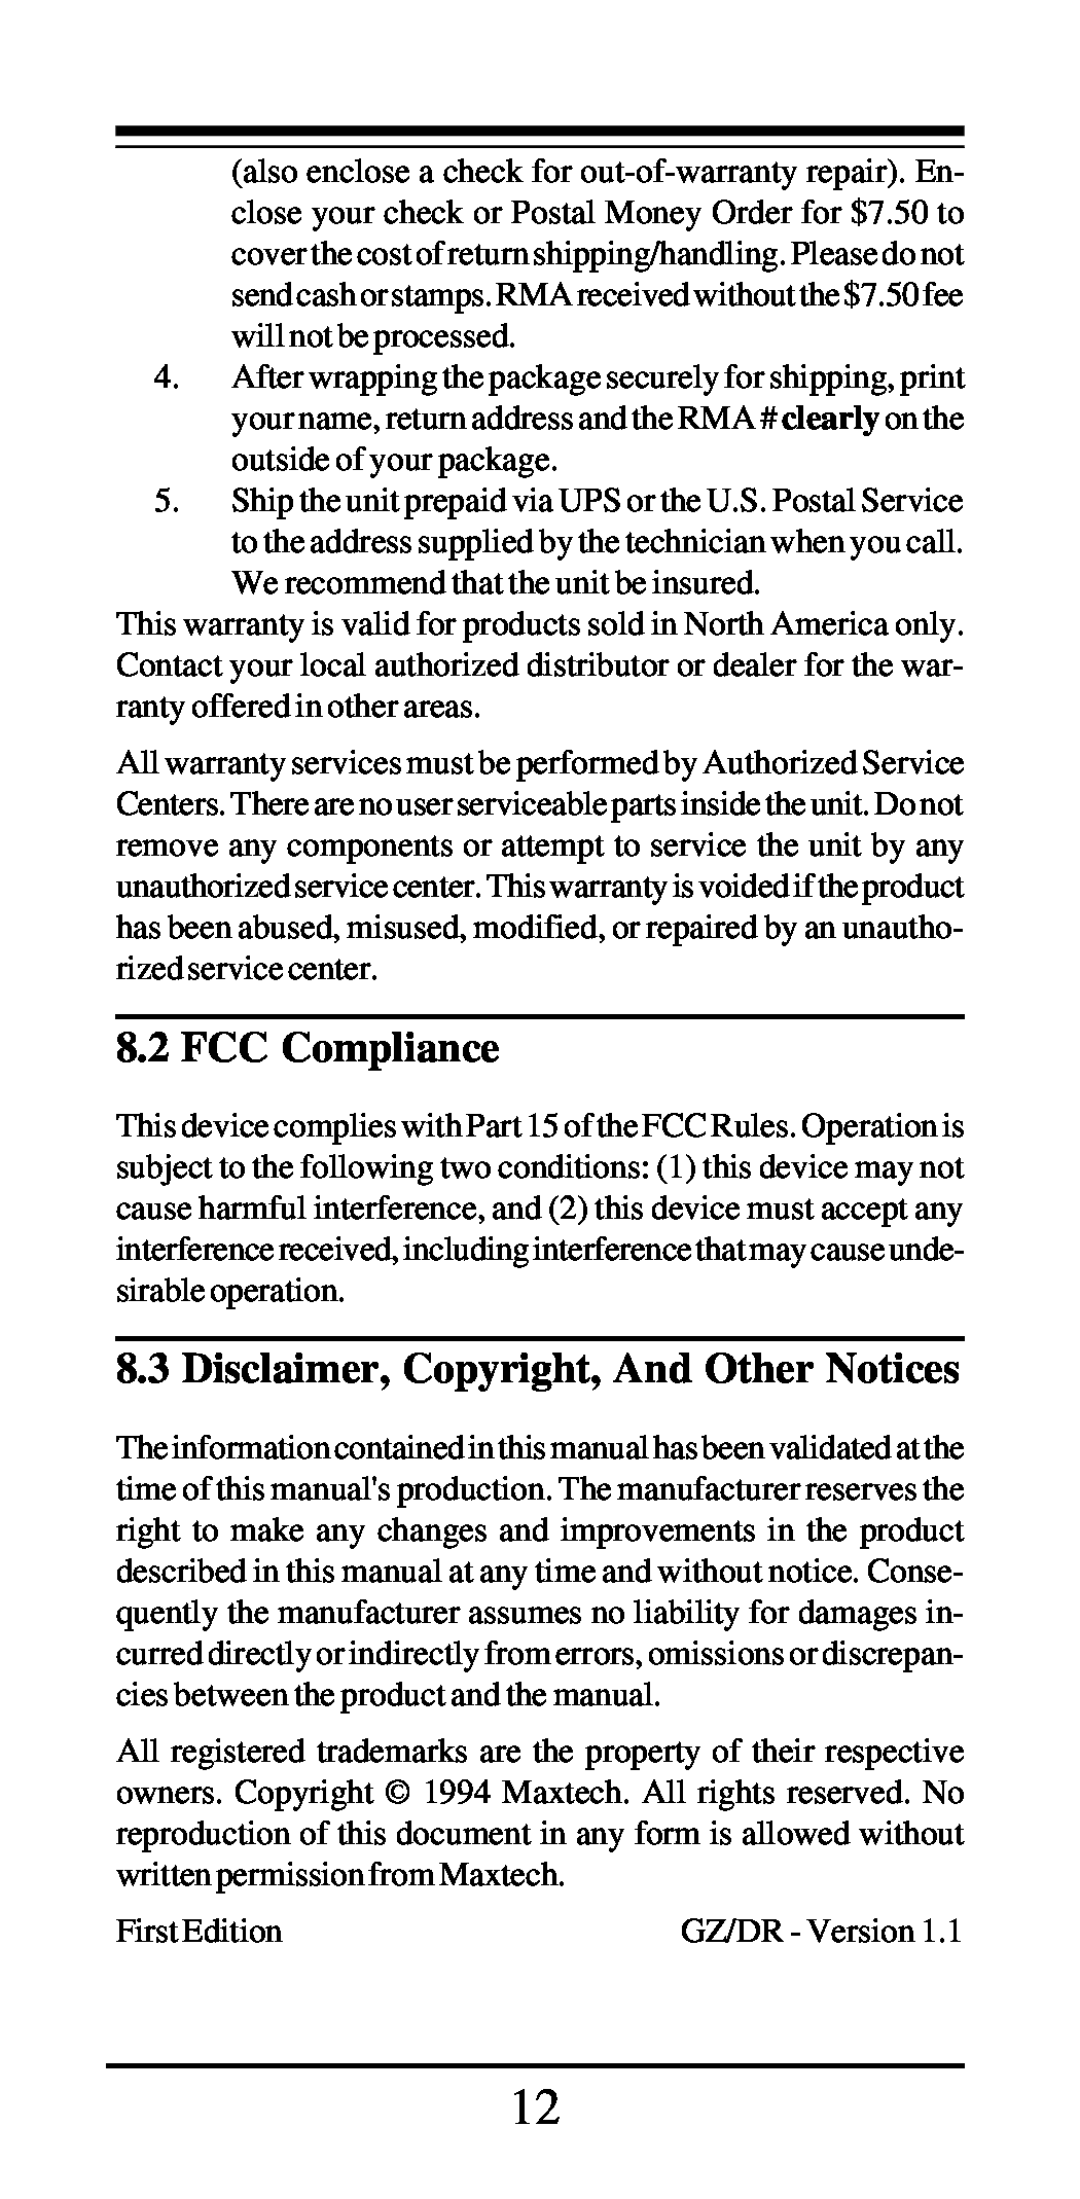 MaxTech PCN2000 Series manual FCC Compliance, Disclaimer, Copyright, And Other Notices 